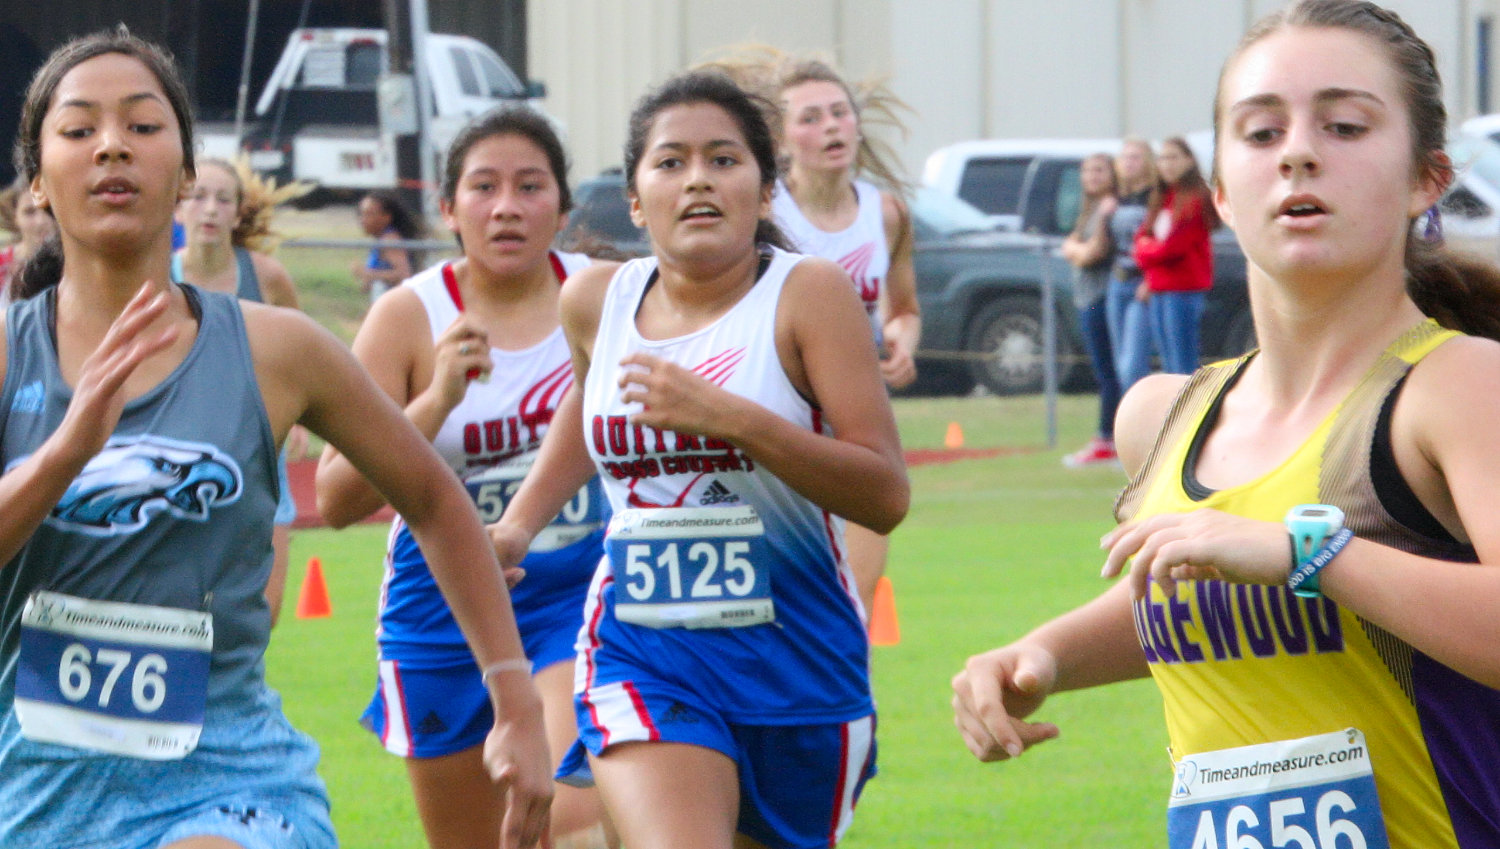 Alexa Flores eyes the finish line followed closely by teammate Joanna Santiago.